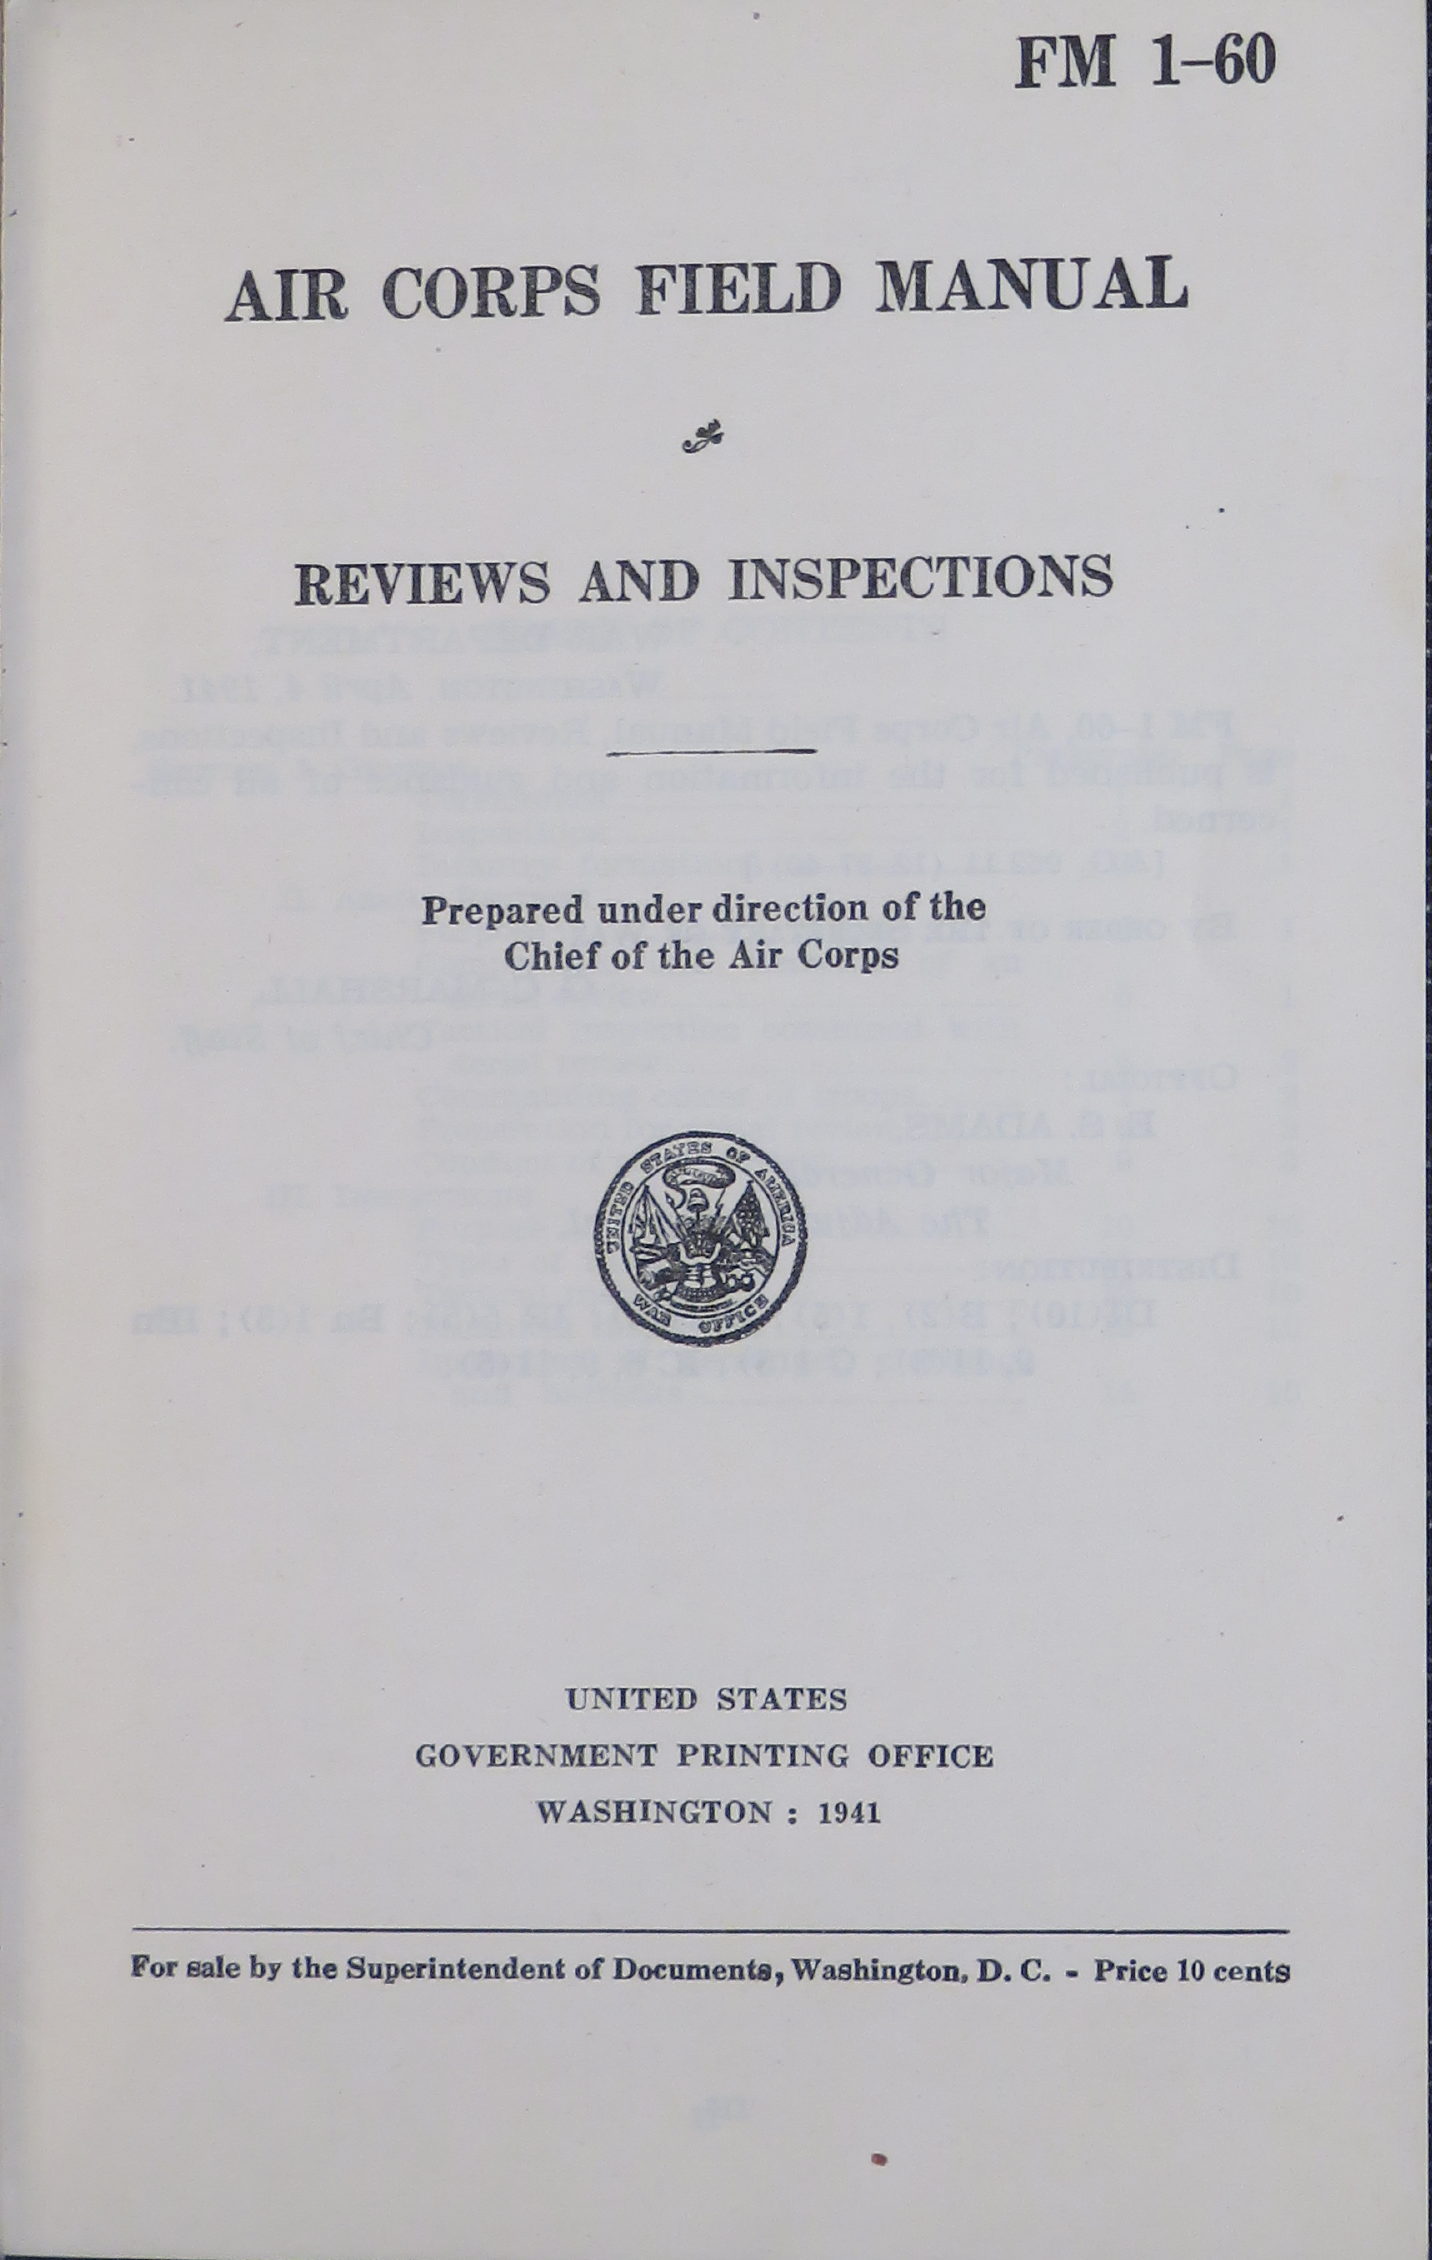 Sample page 3 from AirCorps Library document: Air Corps Field Manuals for Reviews and Inspections